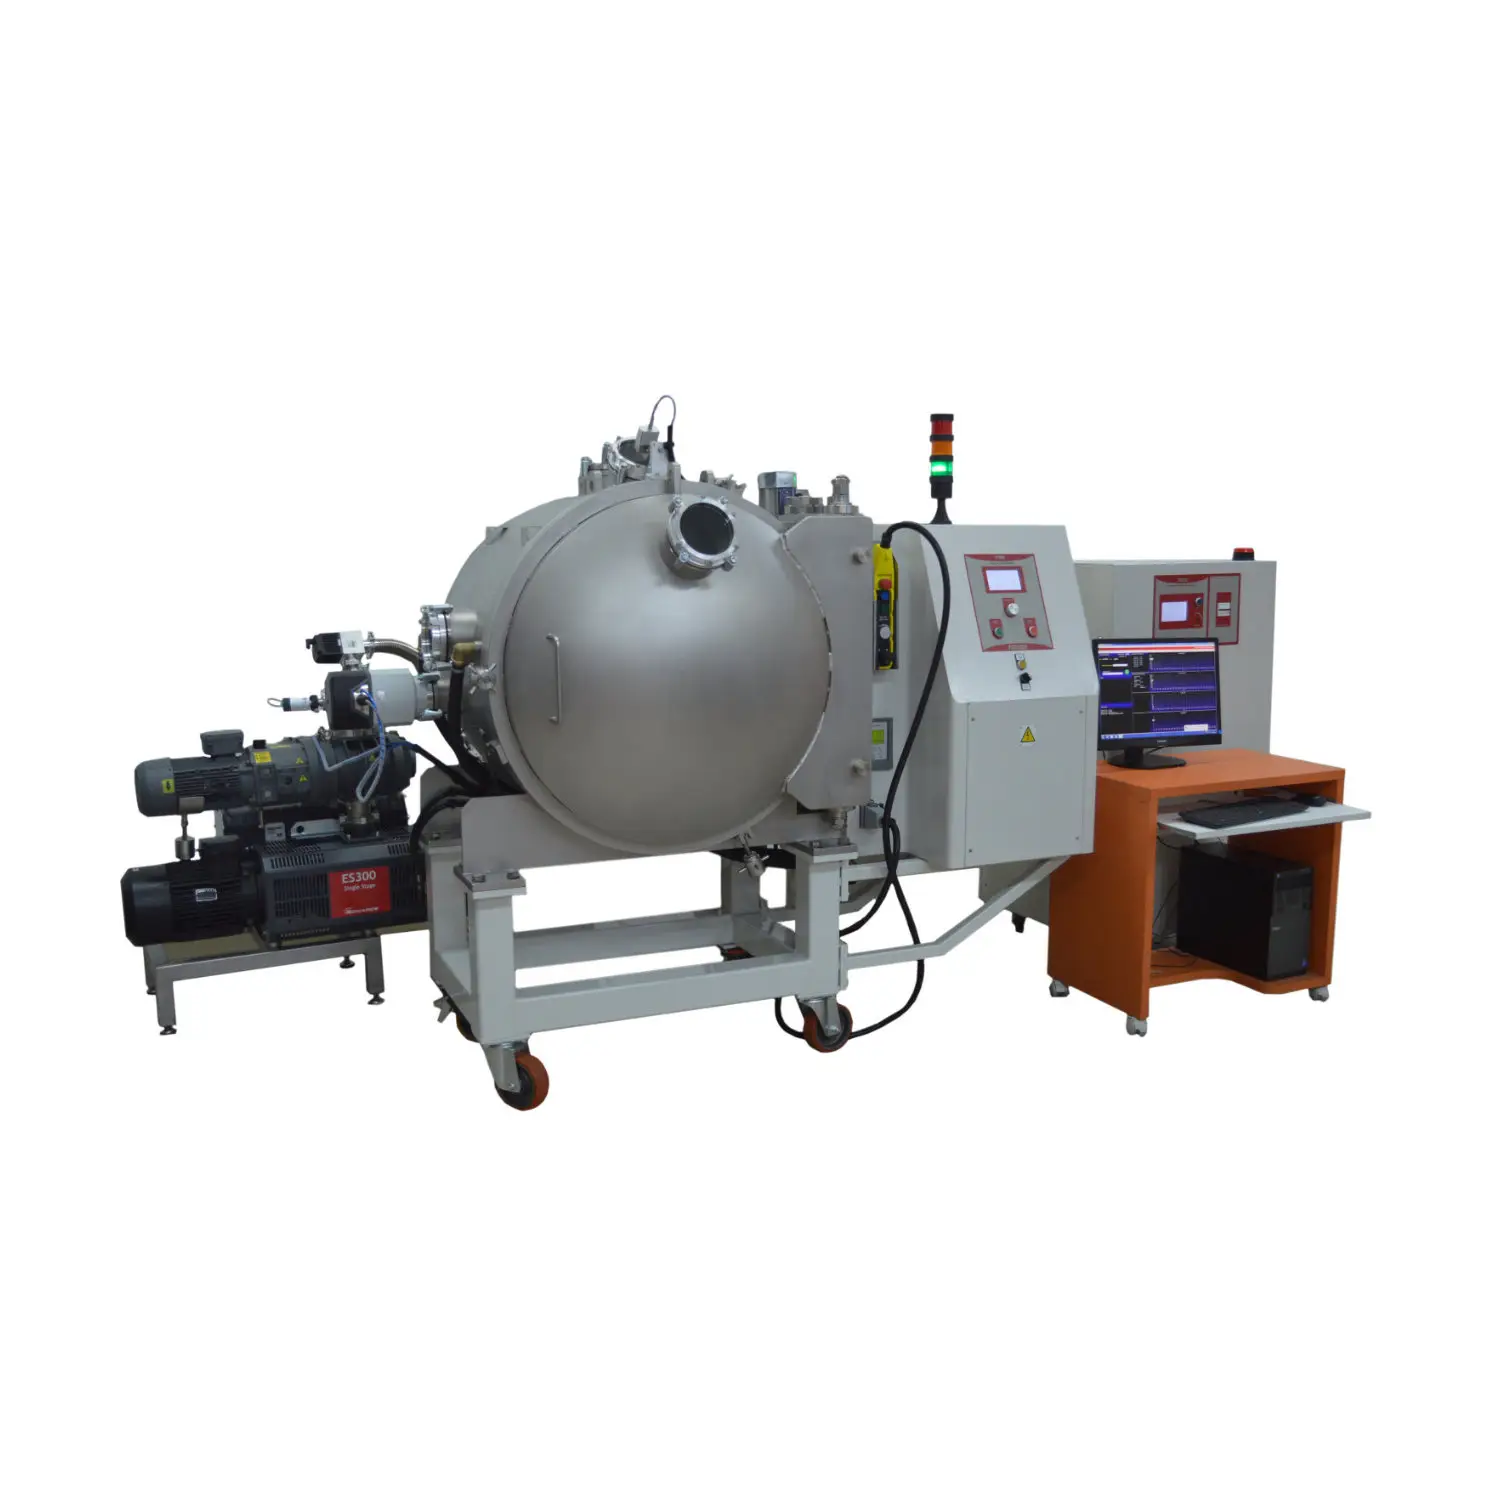 Professional Vacuum Induction Furnace - Powered by Induction Generator - Perfect for Industrial 1500cc crucible high vacuum